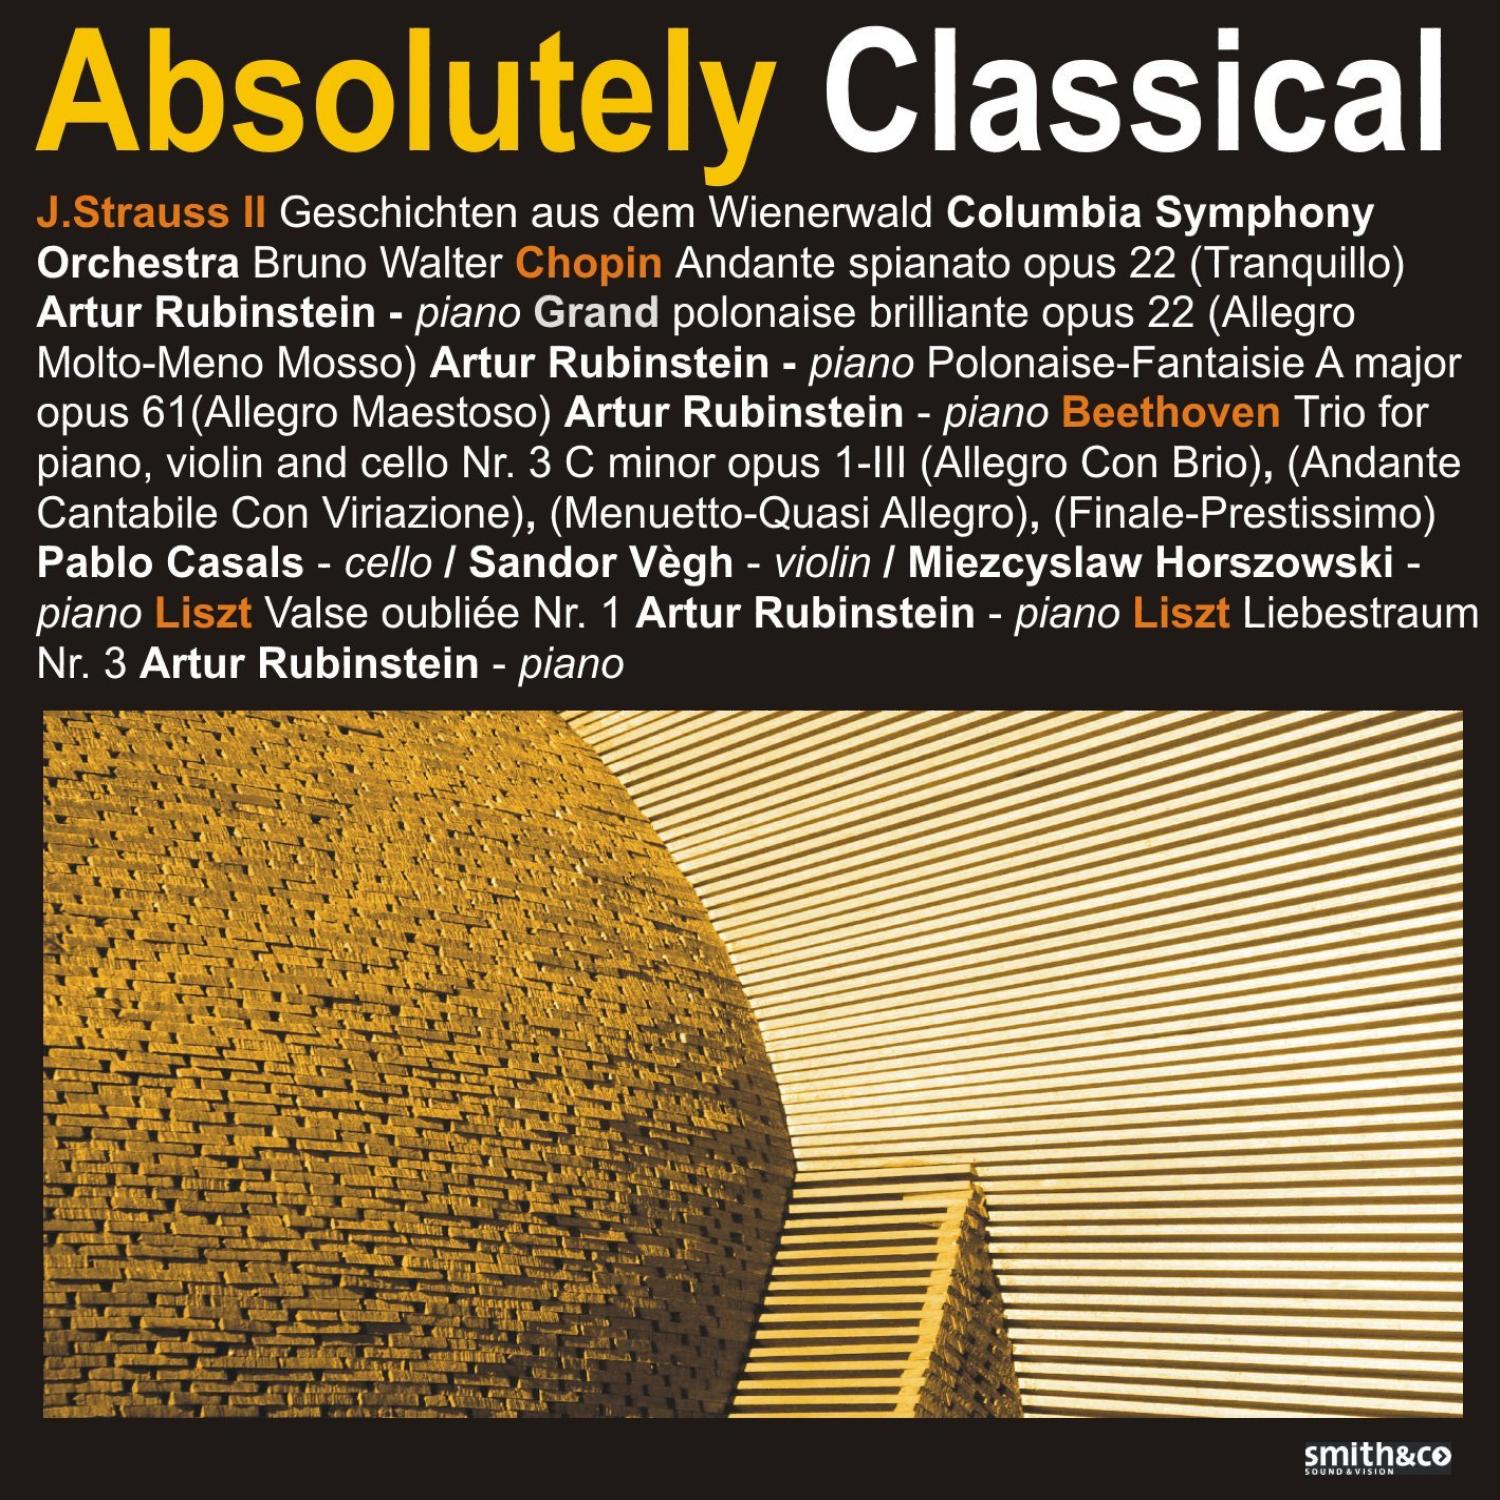 Absolutely Classical Vol. 85